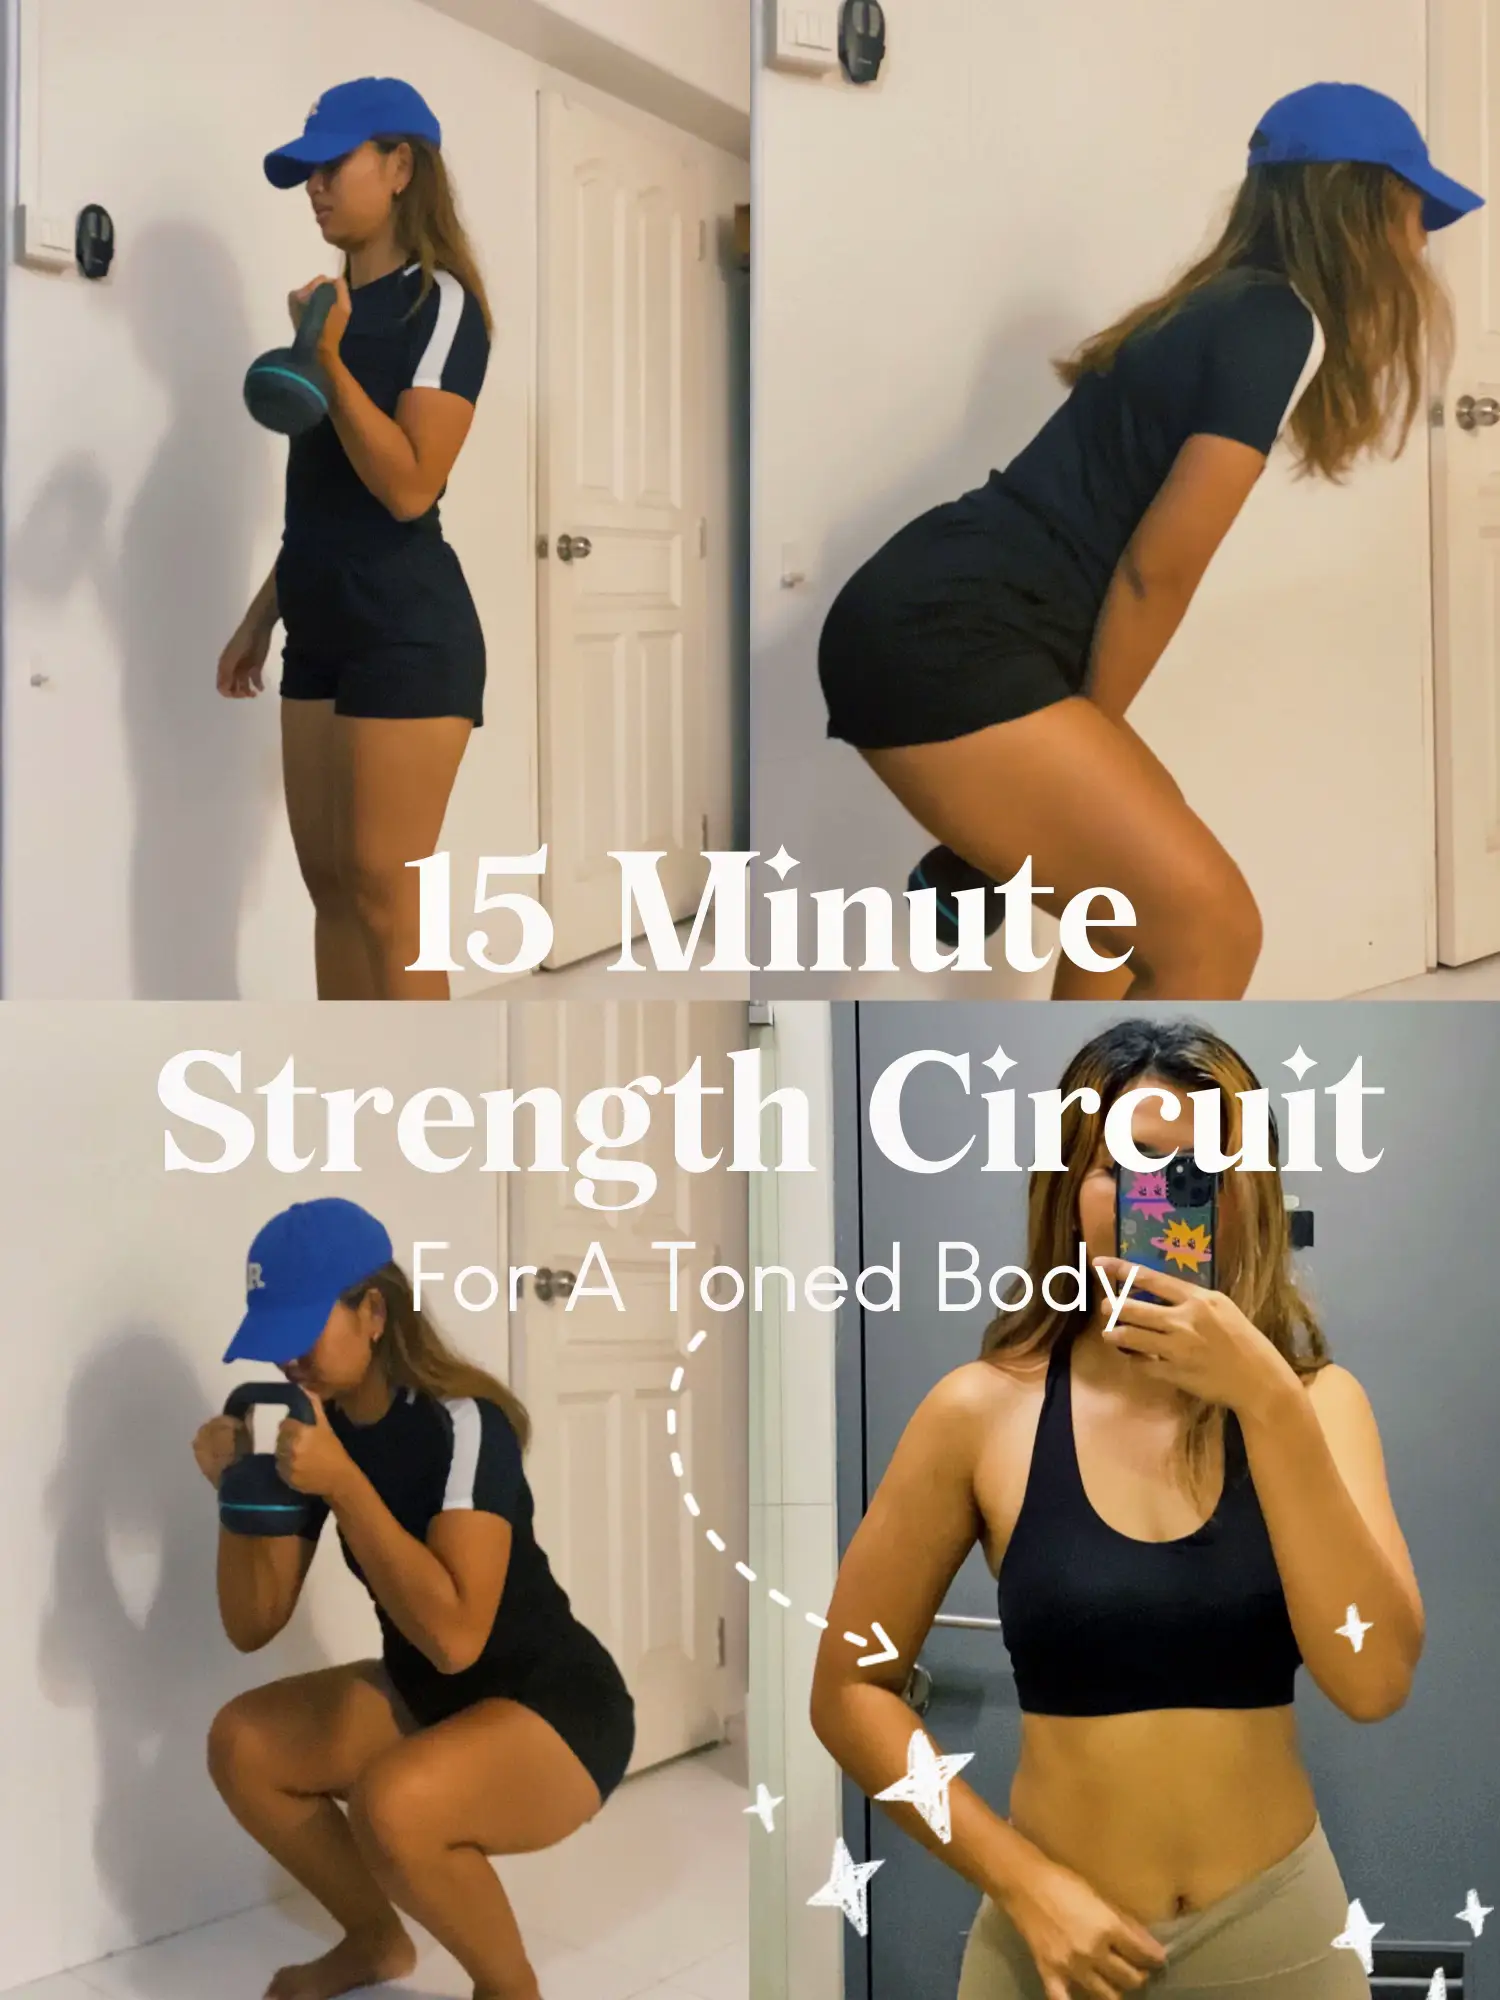 ROUTINE in circuit to REDUCE WAIST 👍🏻 